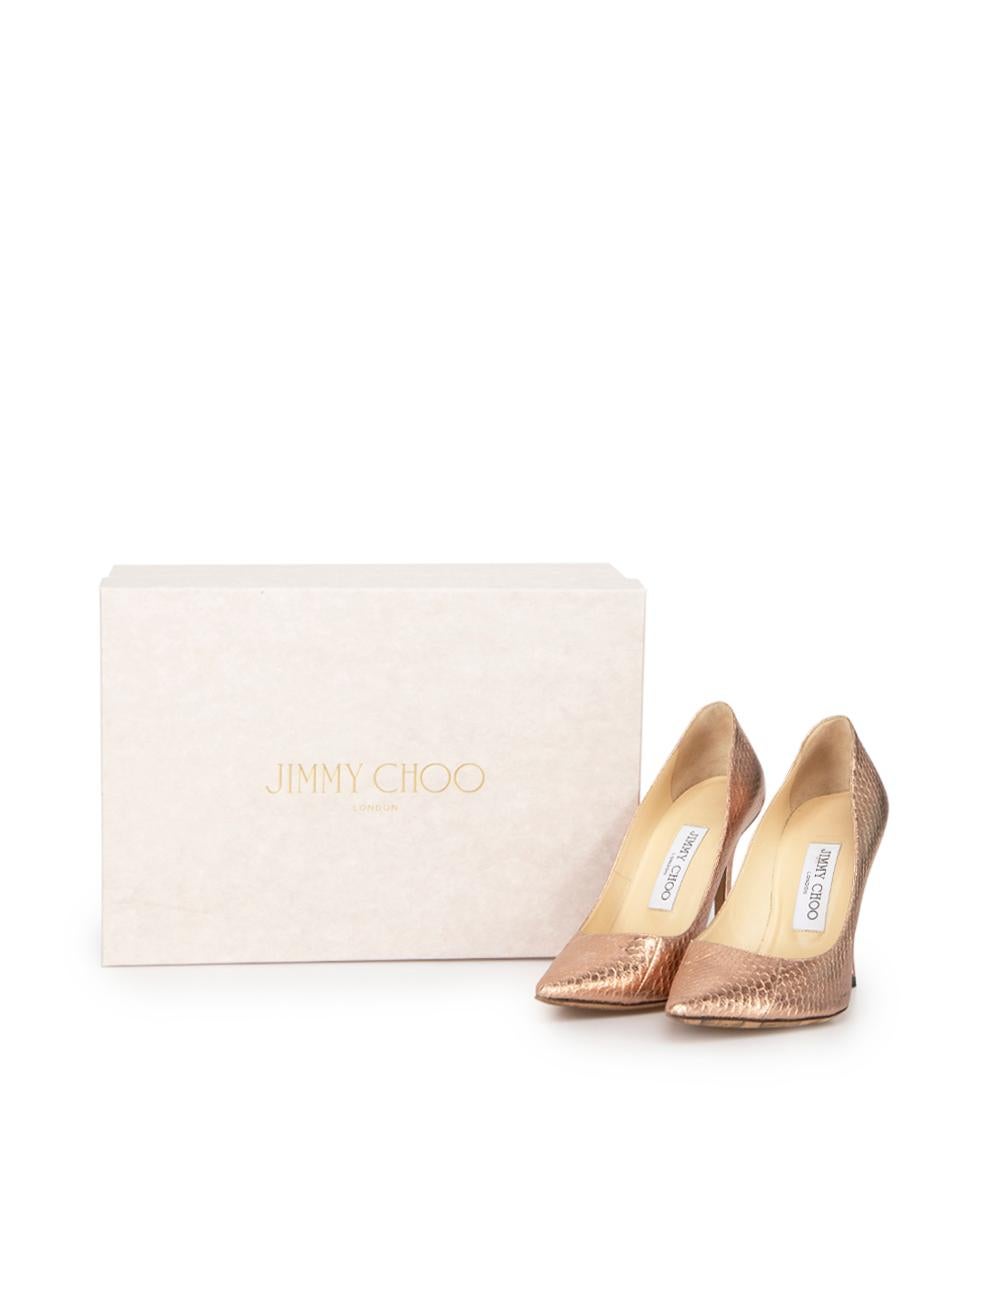 Jimmy Choo Women's Bronze Embossed Leather Pointed Toe Pumps 3